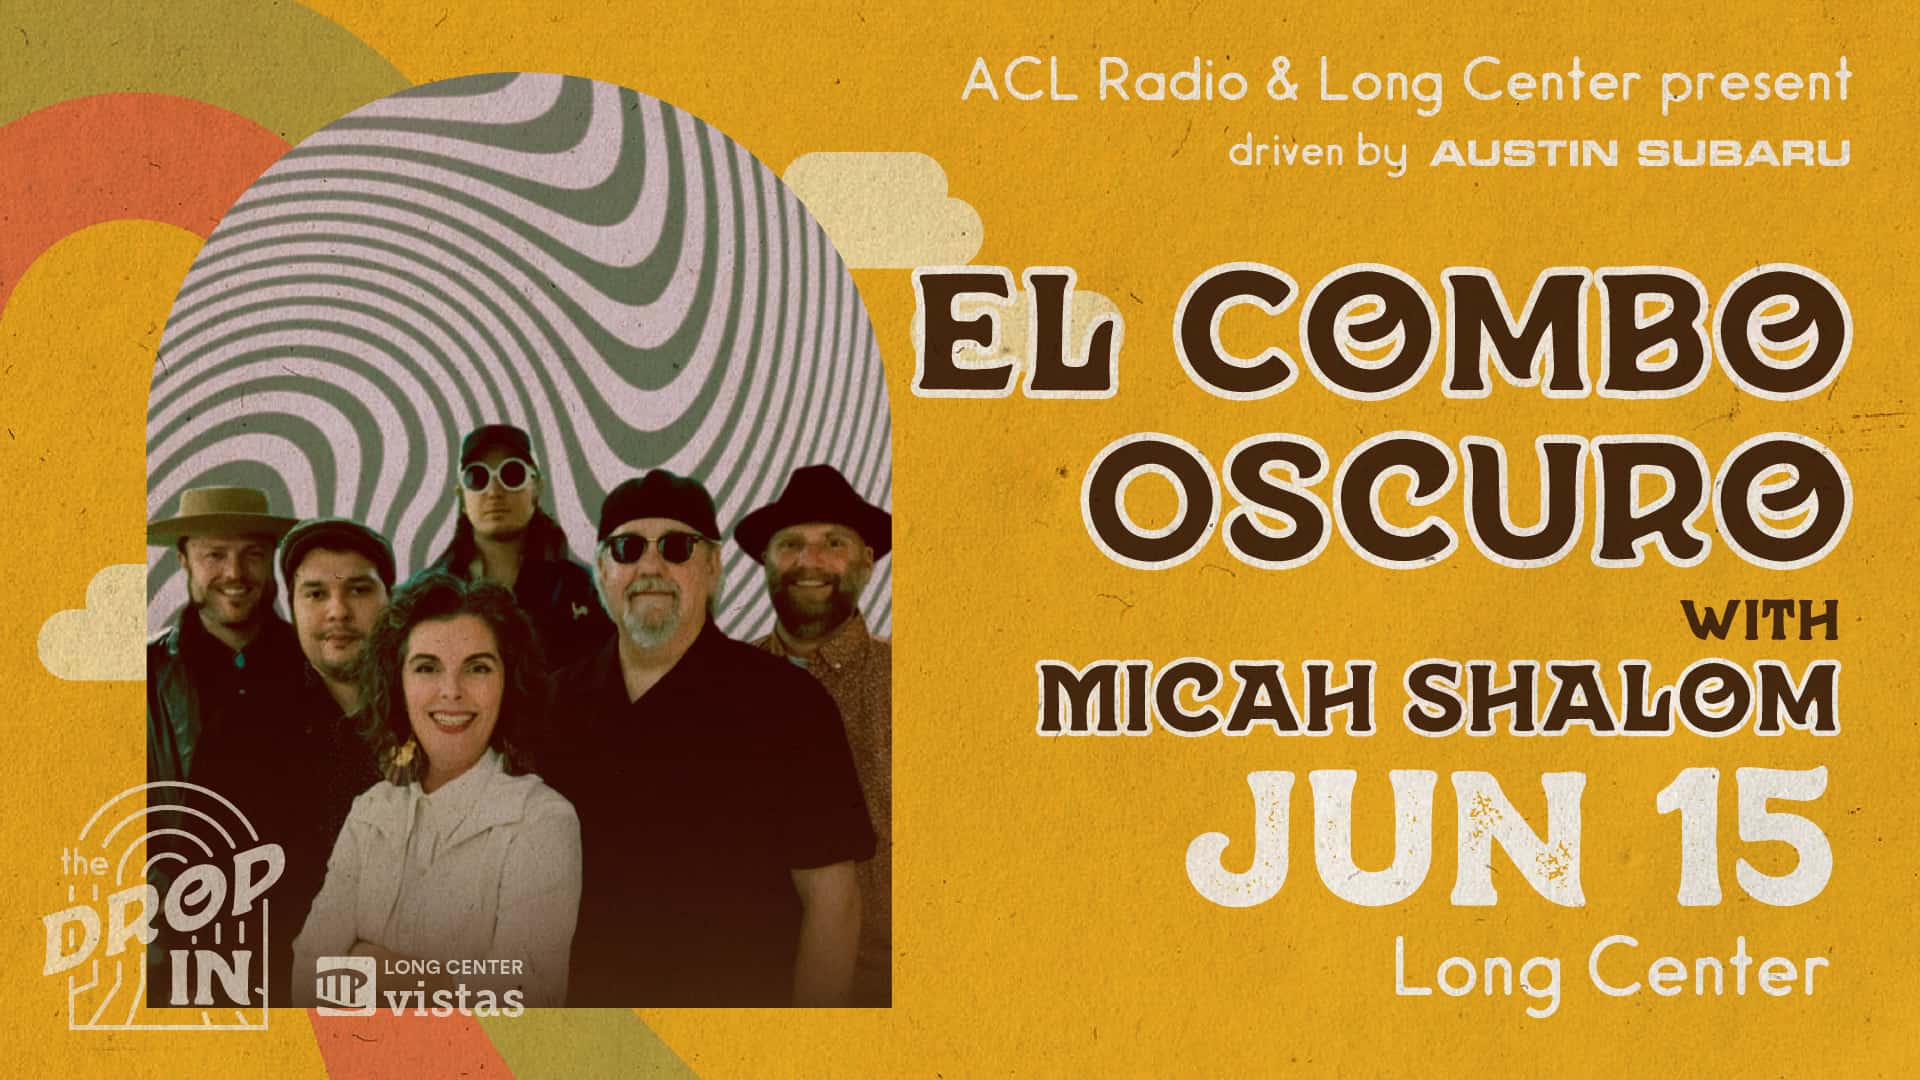 El Combo Oscuro with Michah Shalom